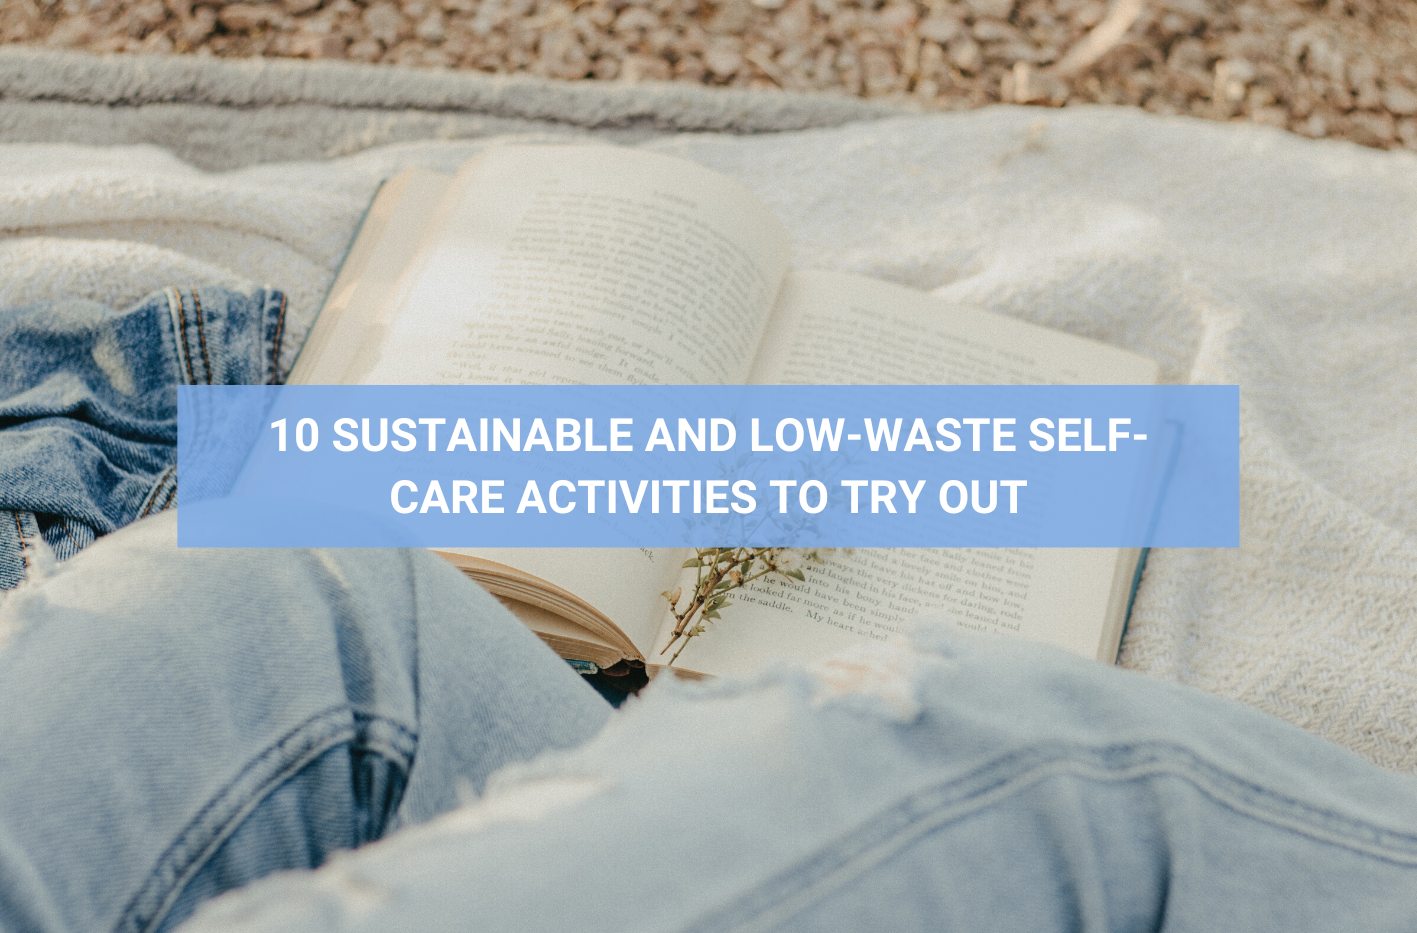 10 Sustainable and Low-Waste Self-Care Activities to Try Out